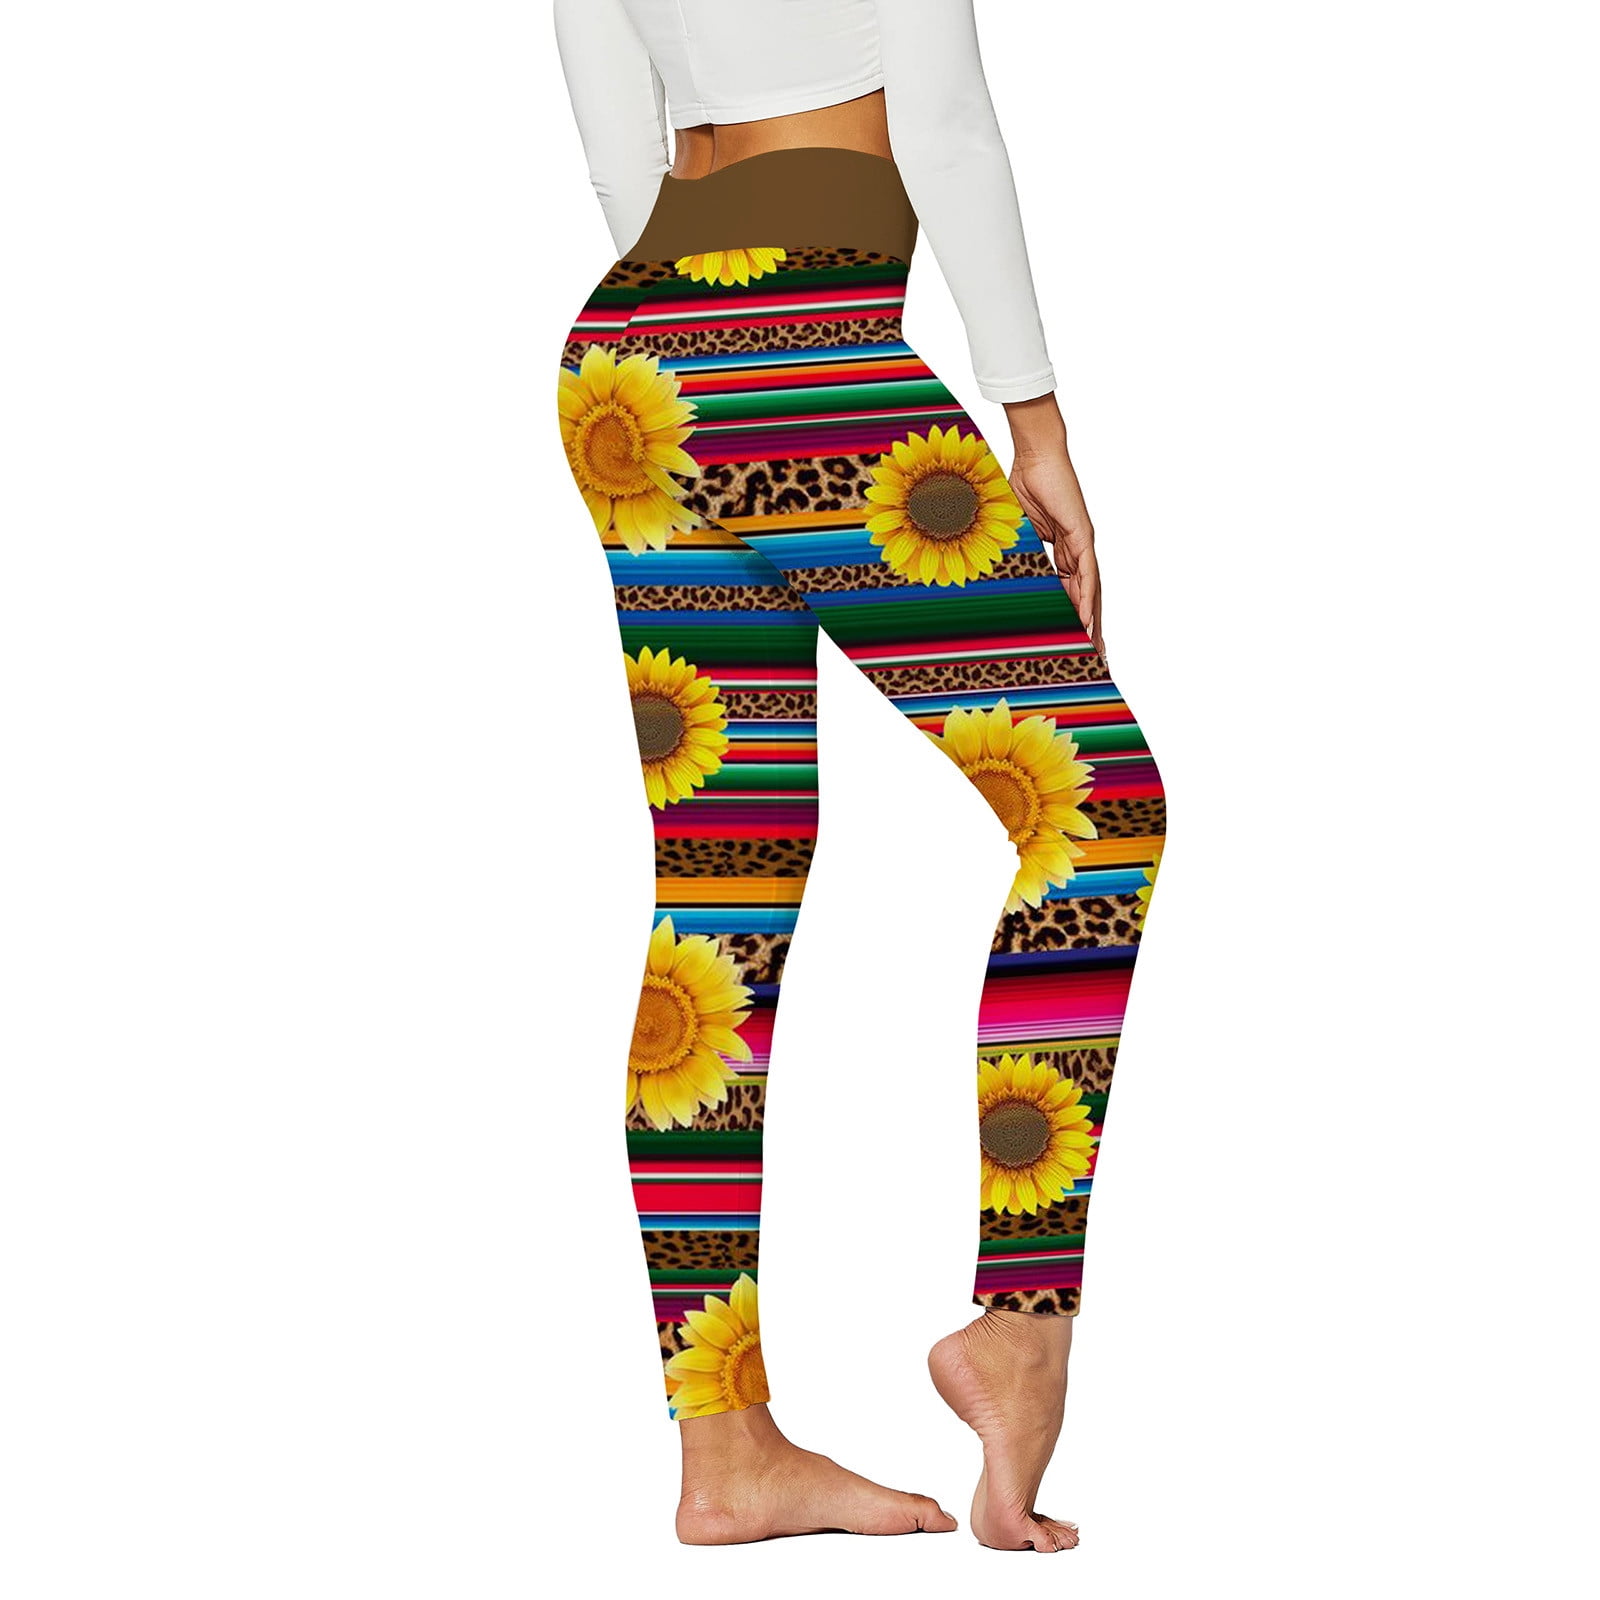 Yellow Leggings For Women Tribal Style Printed High Waisted Yoga Full  Length Workout Running Sports Tights Lift Yoga Legging Size XL